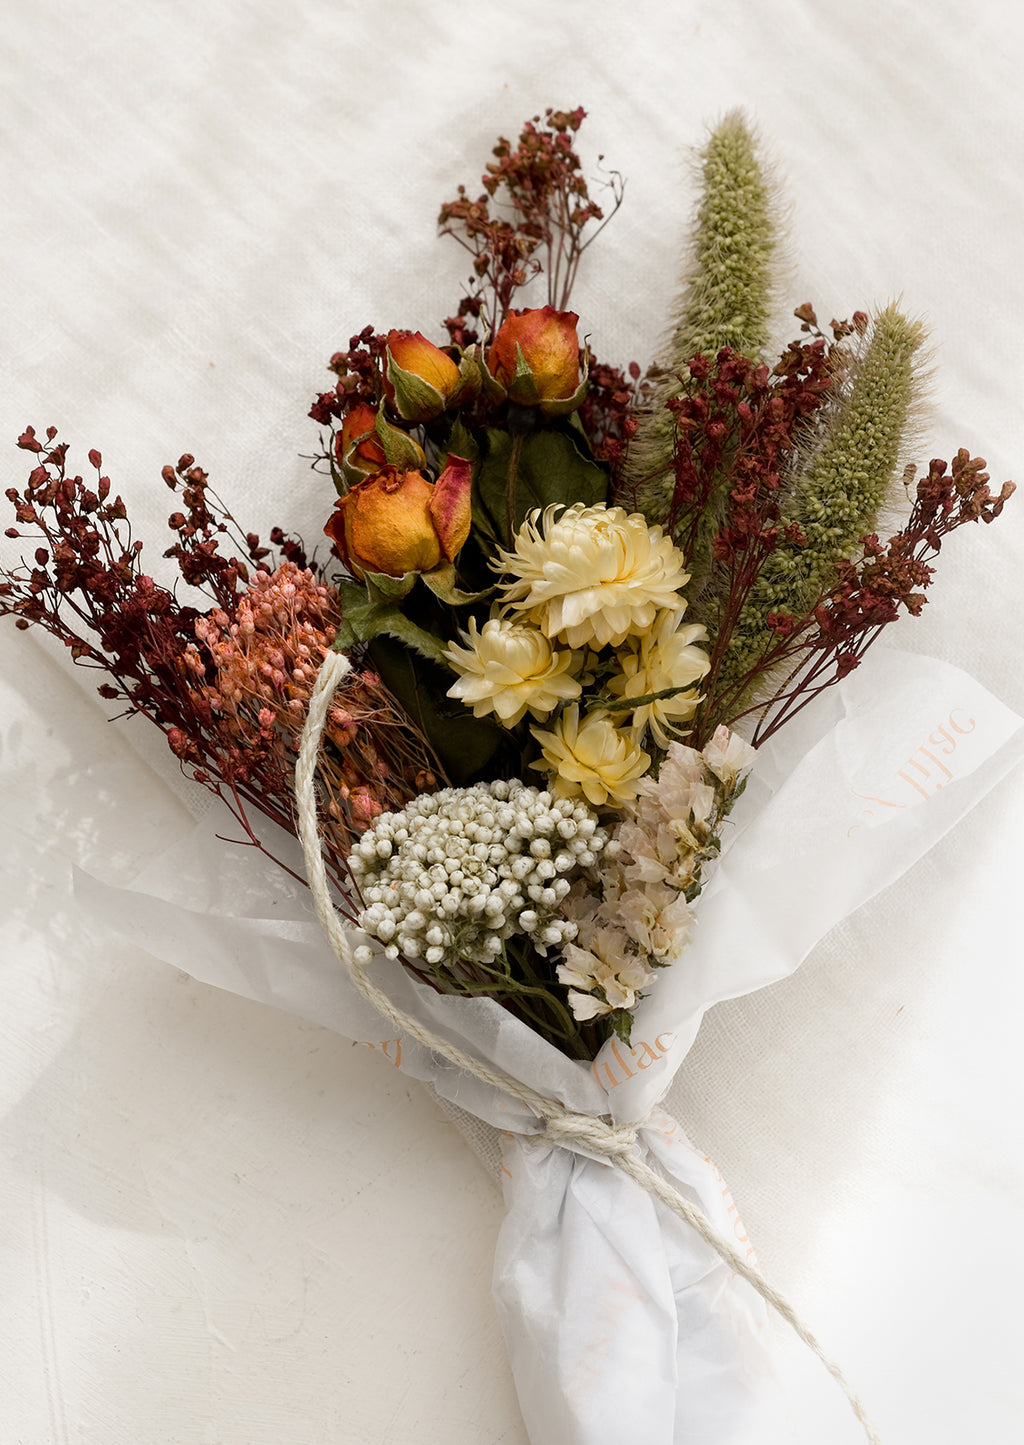 Countryside Multi: A bouquet of dried flowers in a ivory, green, white and pink mix.